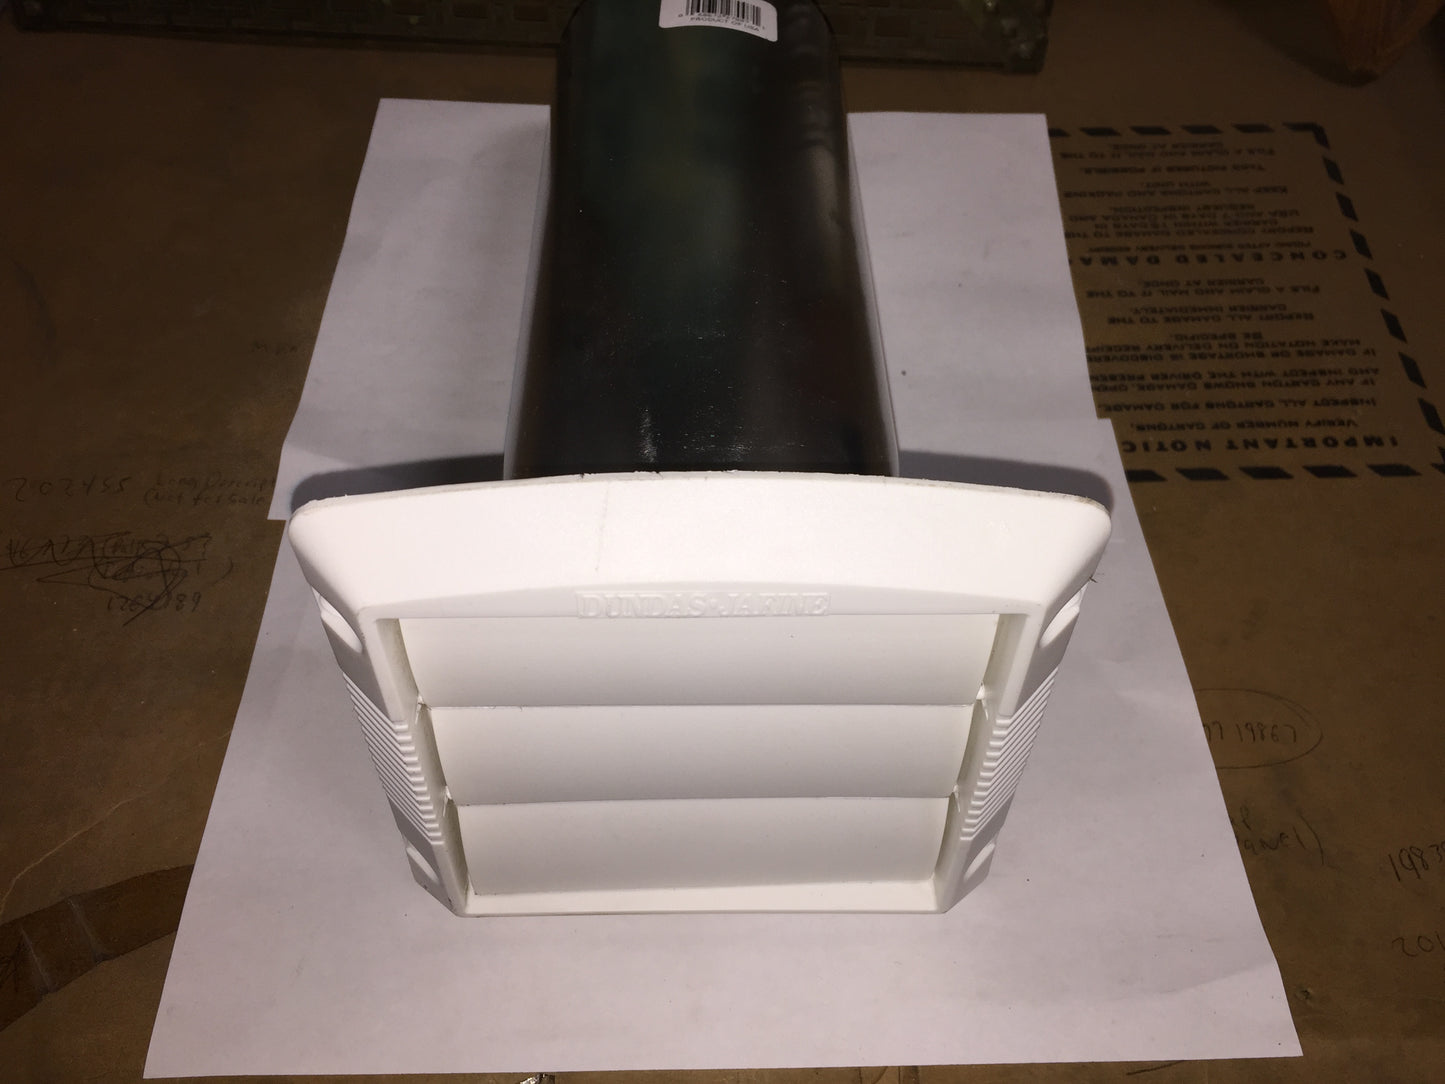 4" SILVER ALUMINUM DRYER VENT HOOD WITH PLASTIC GRILLE